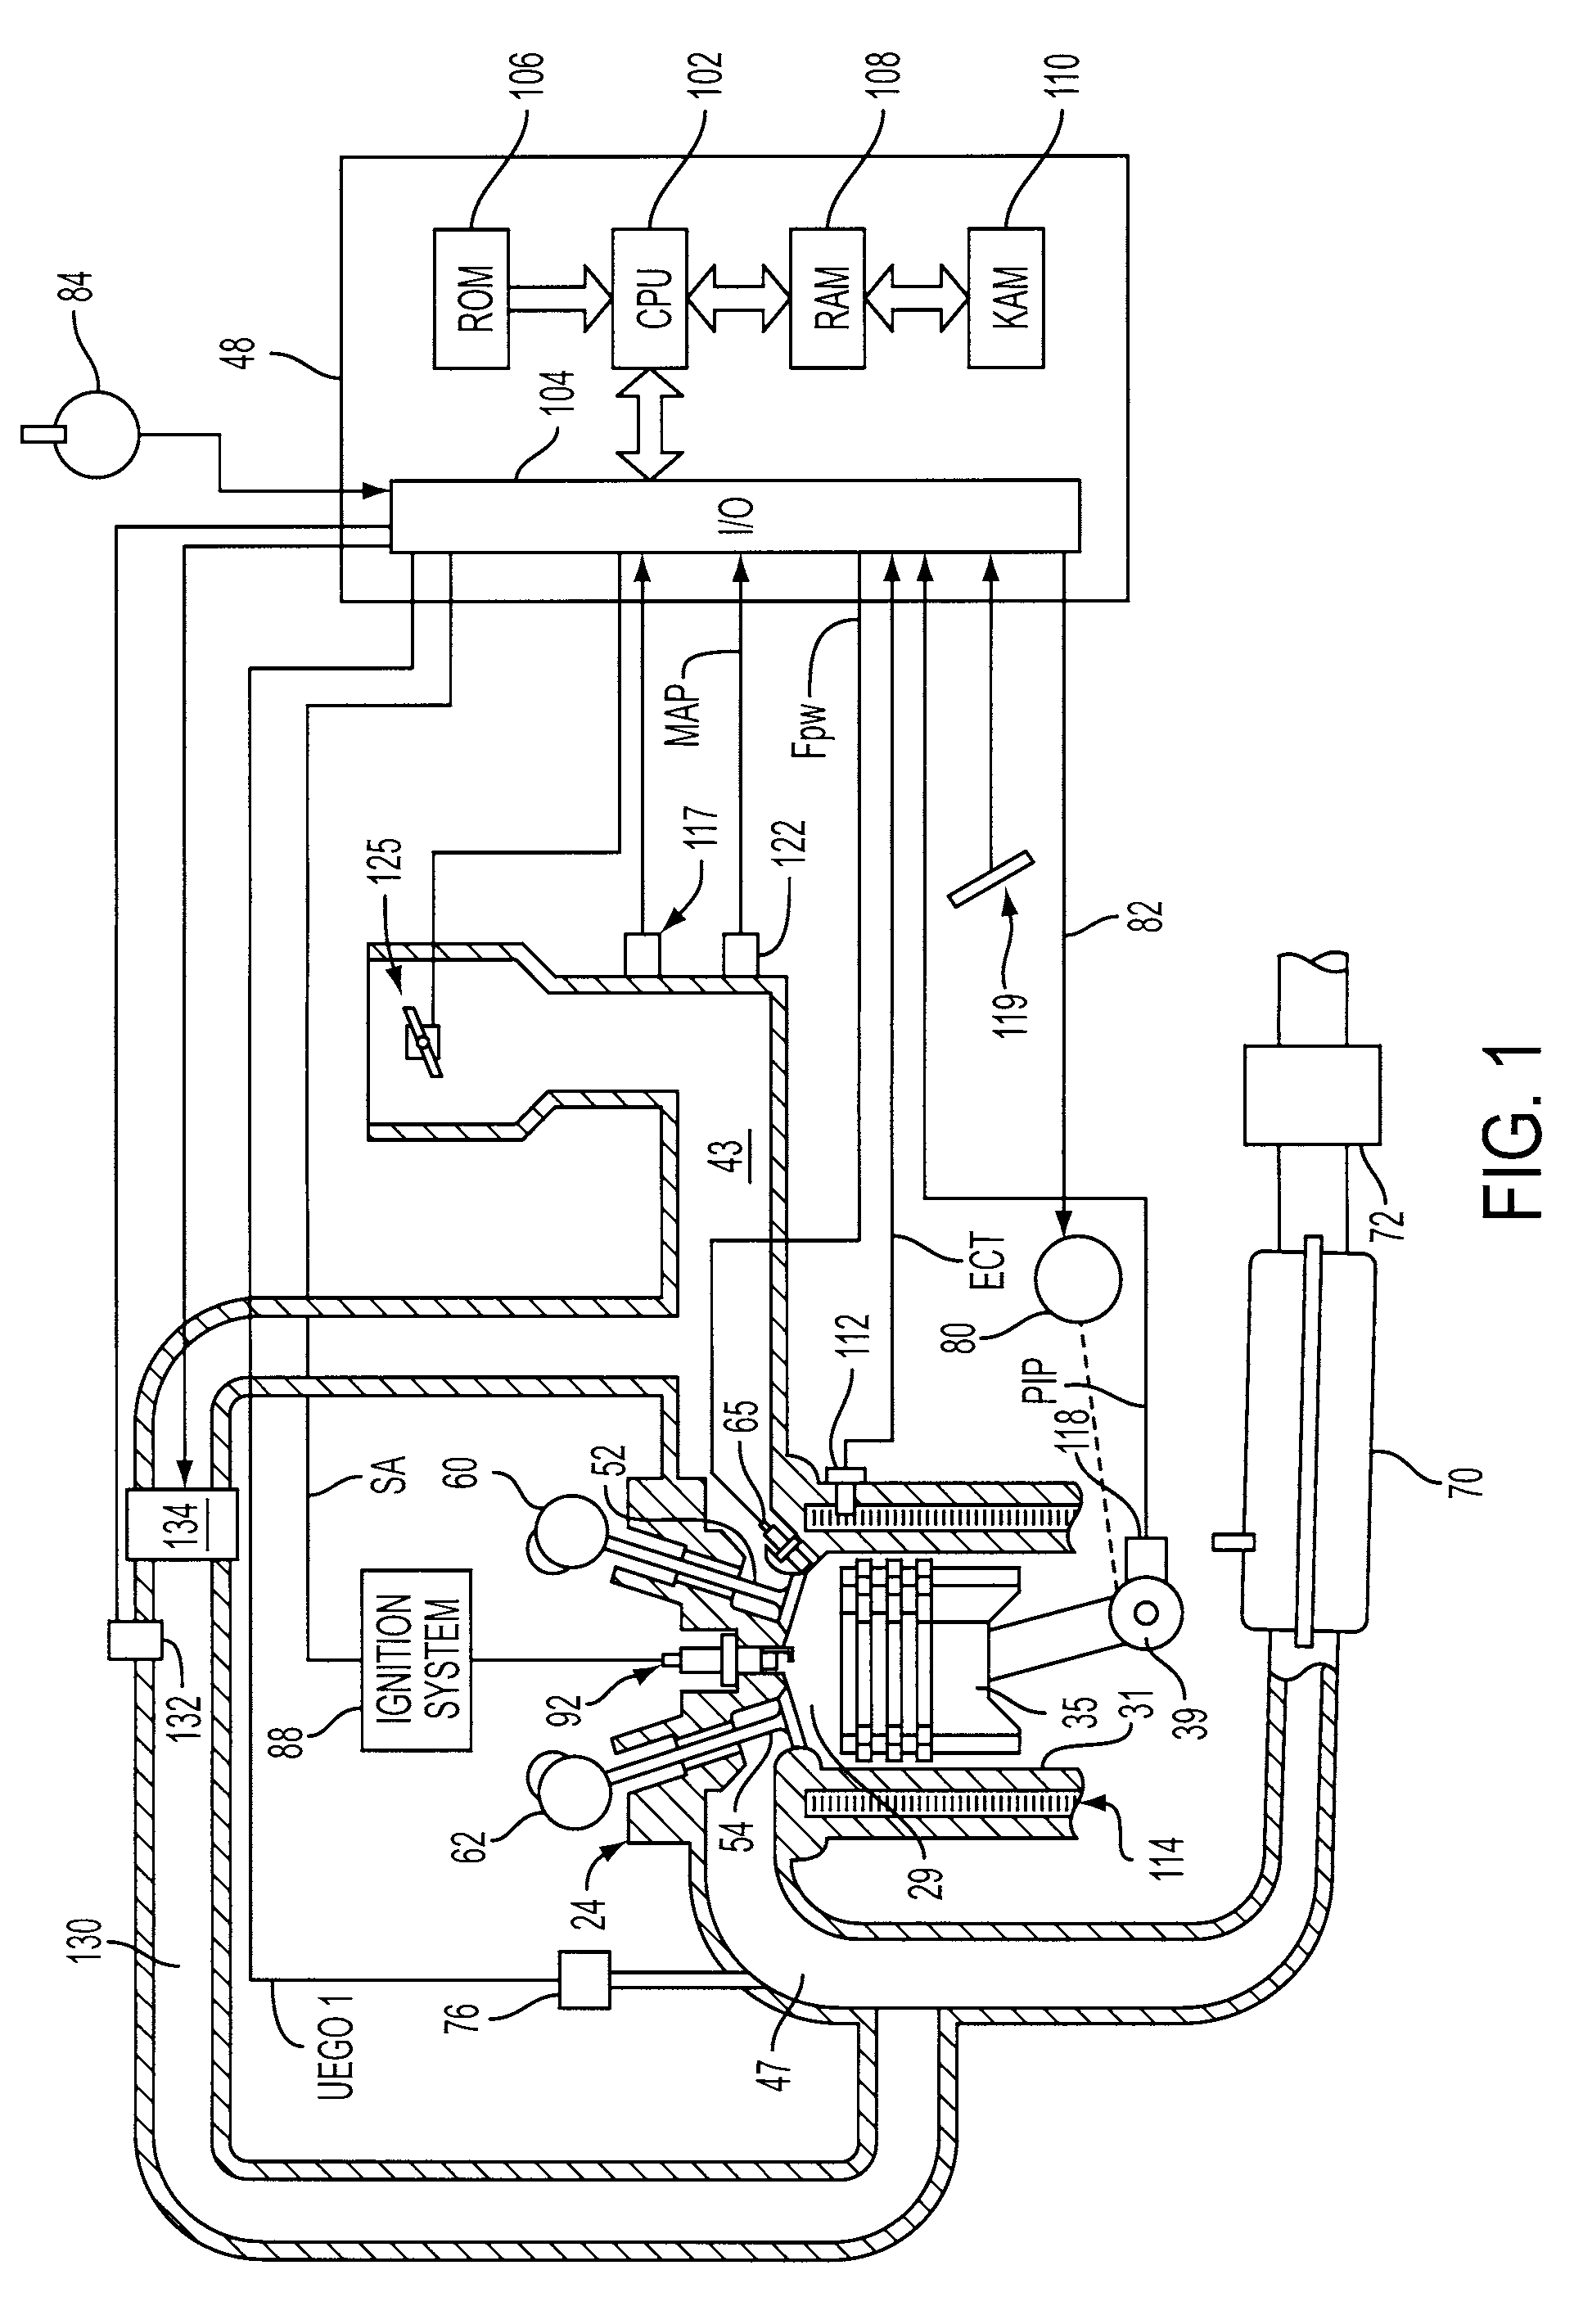 System and method for operation of an engine having multiple combustion modes and adjustable balance shafts